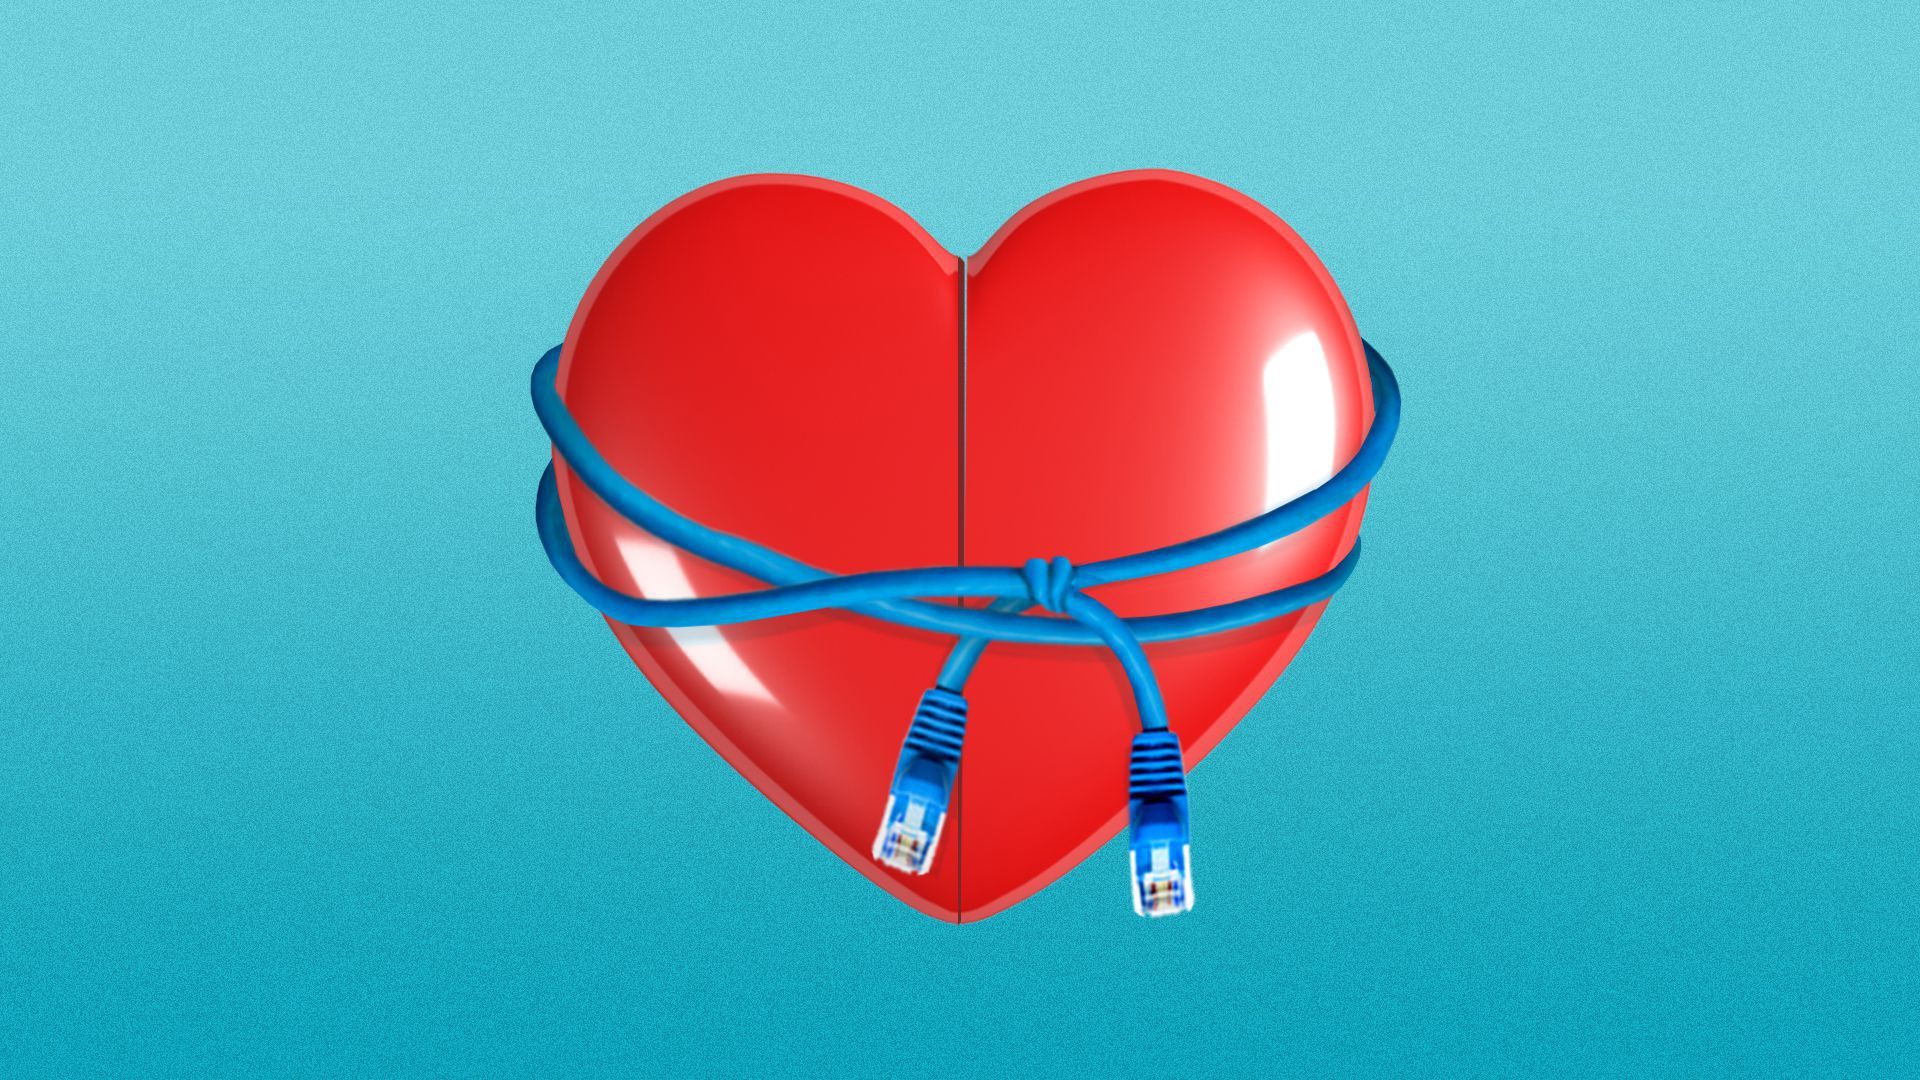 An illustration of a heart surrounded by an Internet cable